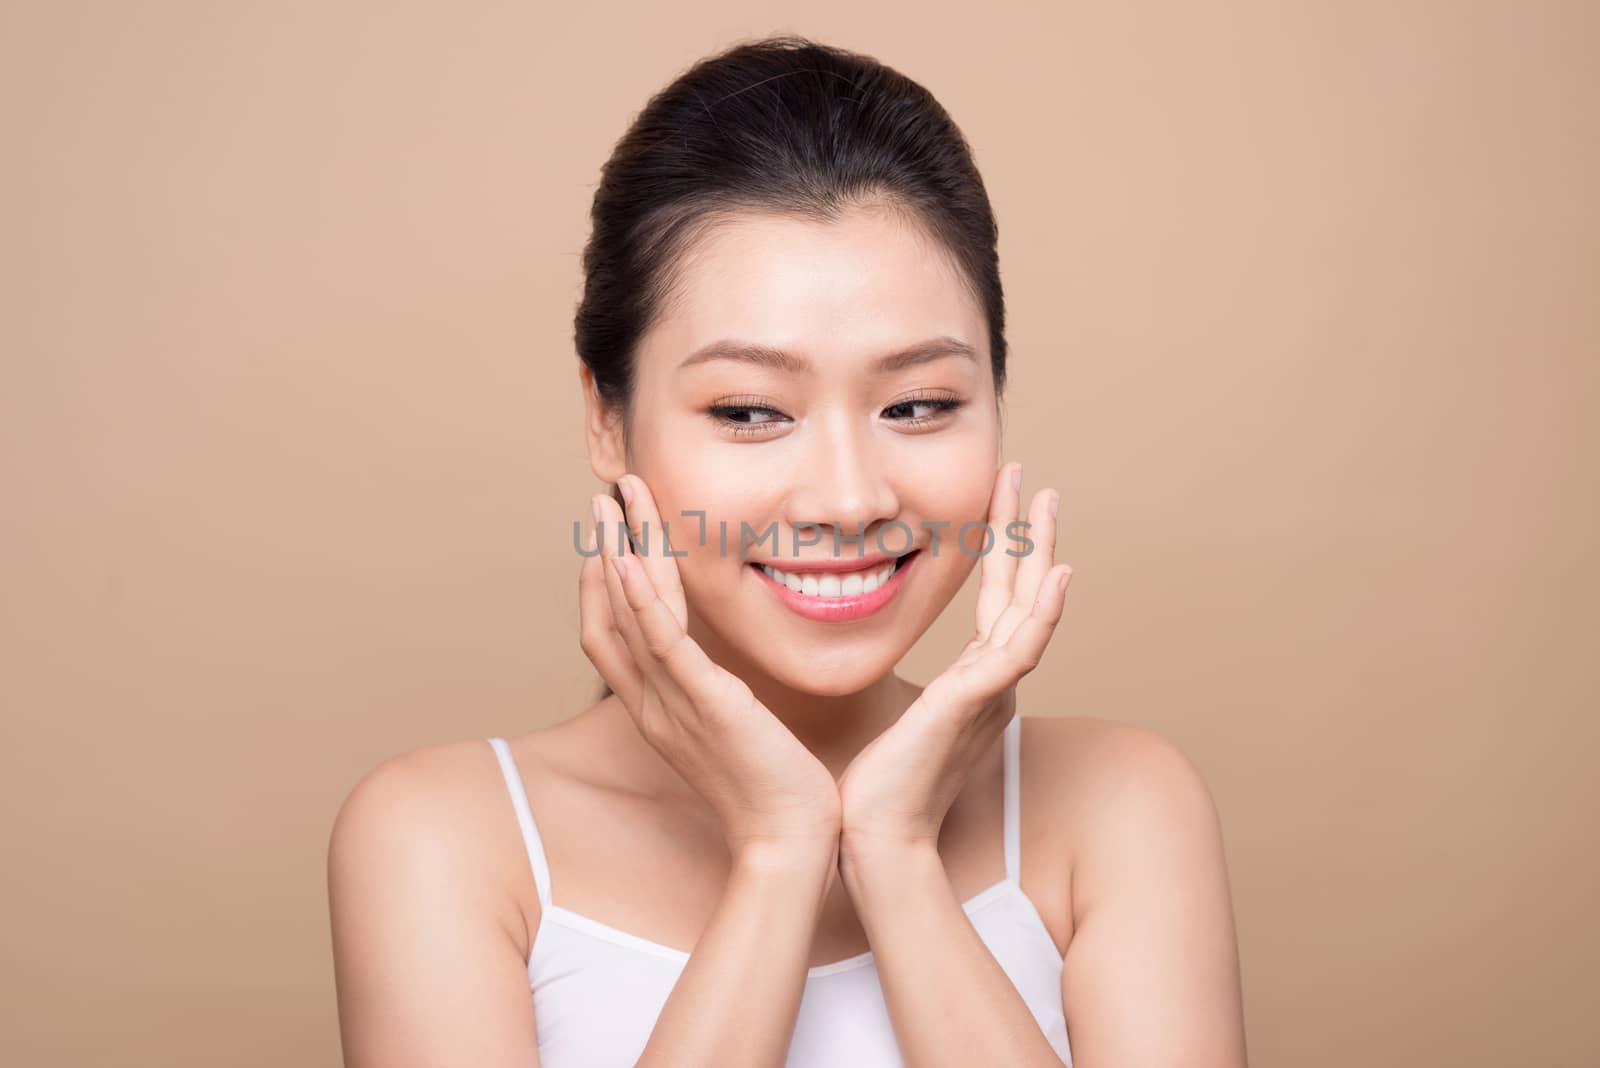 Beauty face. Facial treatment. Young asian woman with clean perfect skin touch her face.